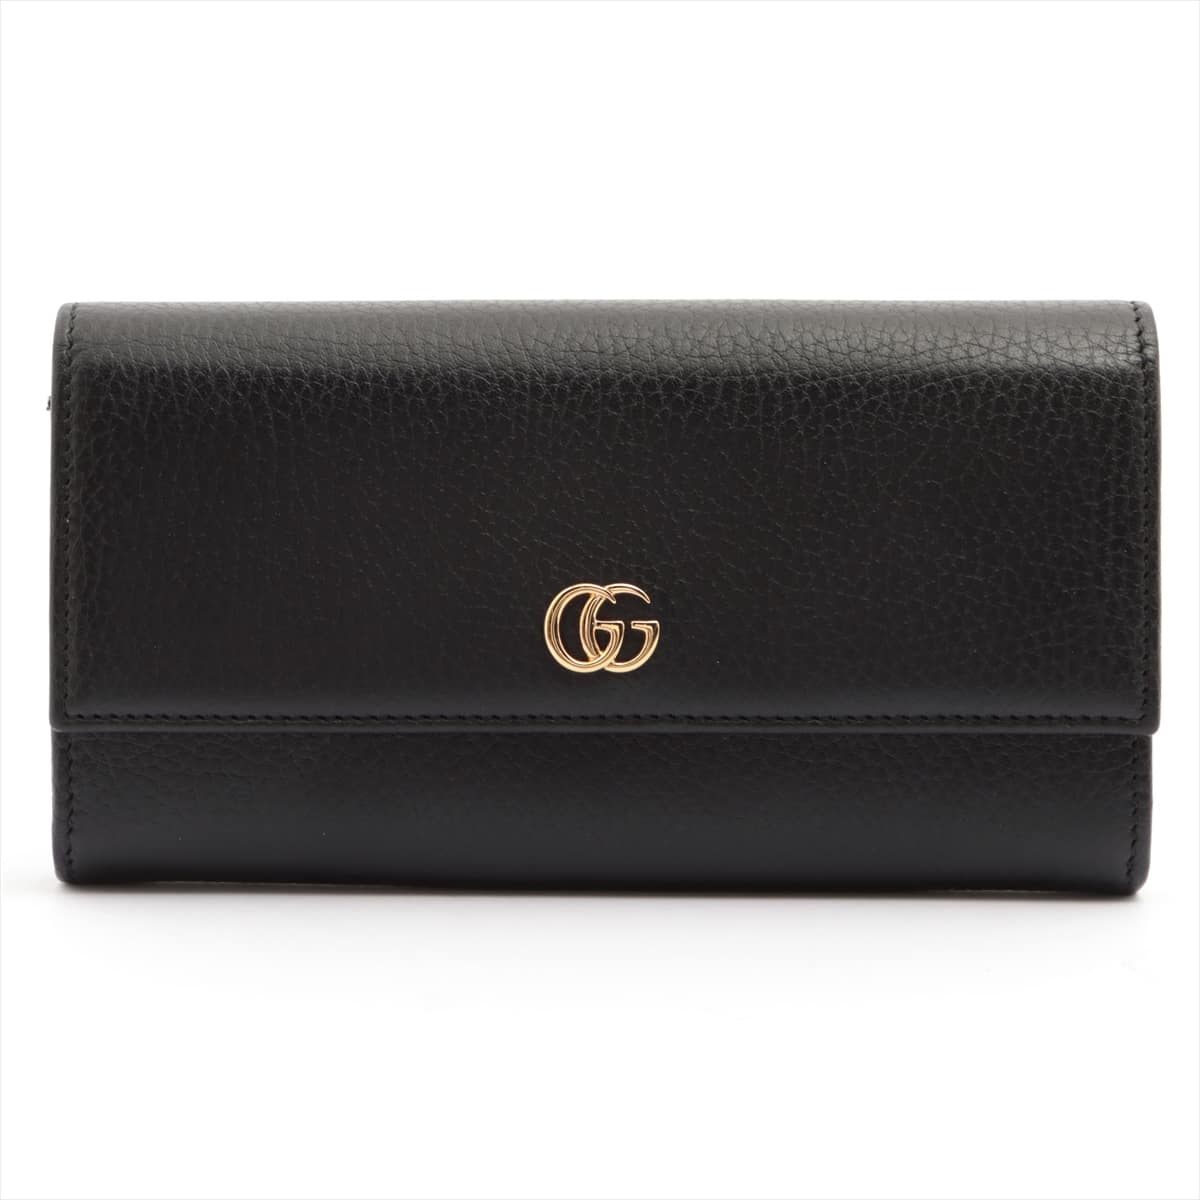 Gucci GG Marmont 456116 Leather Wallet Black×Gold